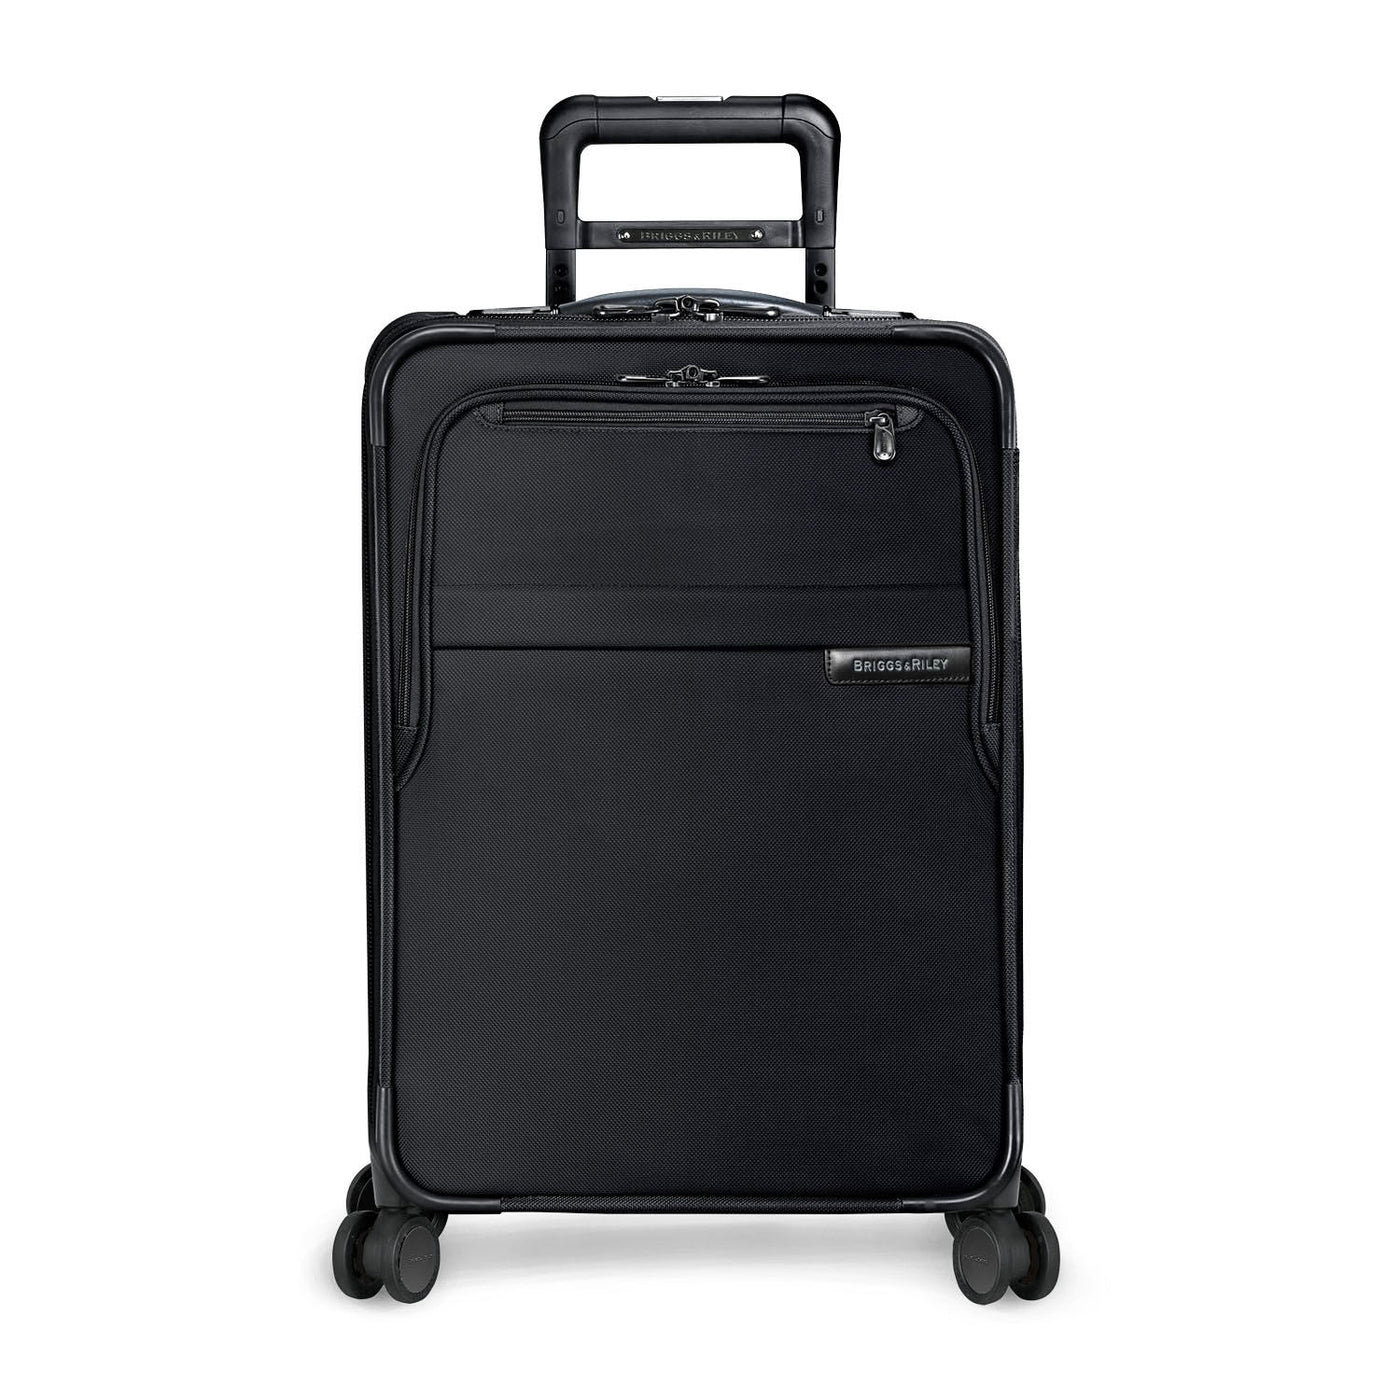 Business Travel Luggage | Baseline Collection | Briggs & Riley